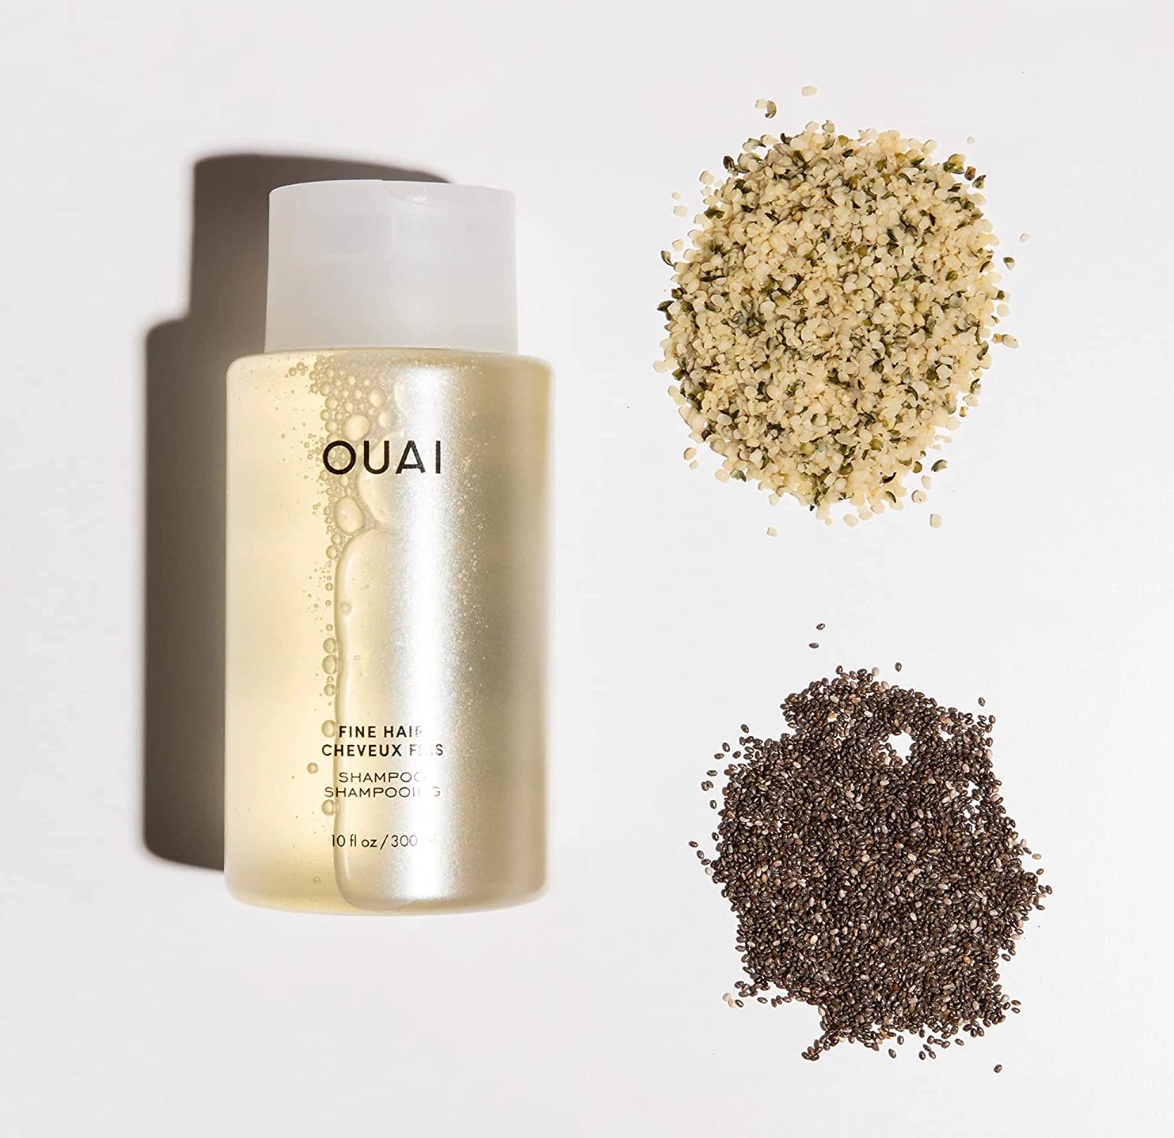 OUAI Fine Shampoo. Bring Fine Hair to the Next Level with Strengthening Keratin, Biotin and Chia Seed Oil. Hair is Left Clean, Bouncy and Voluminous. Free from Parabens, Sulfates and Phthalates. 10 oz